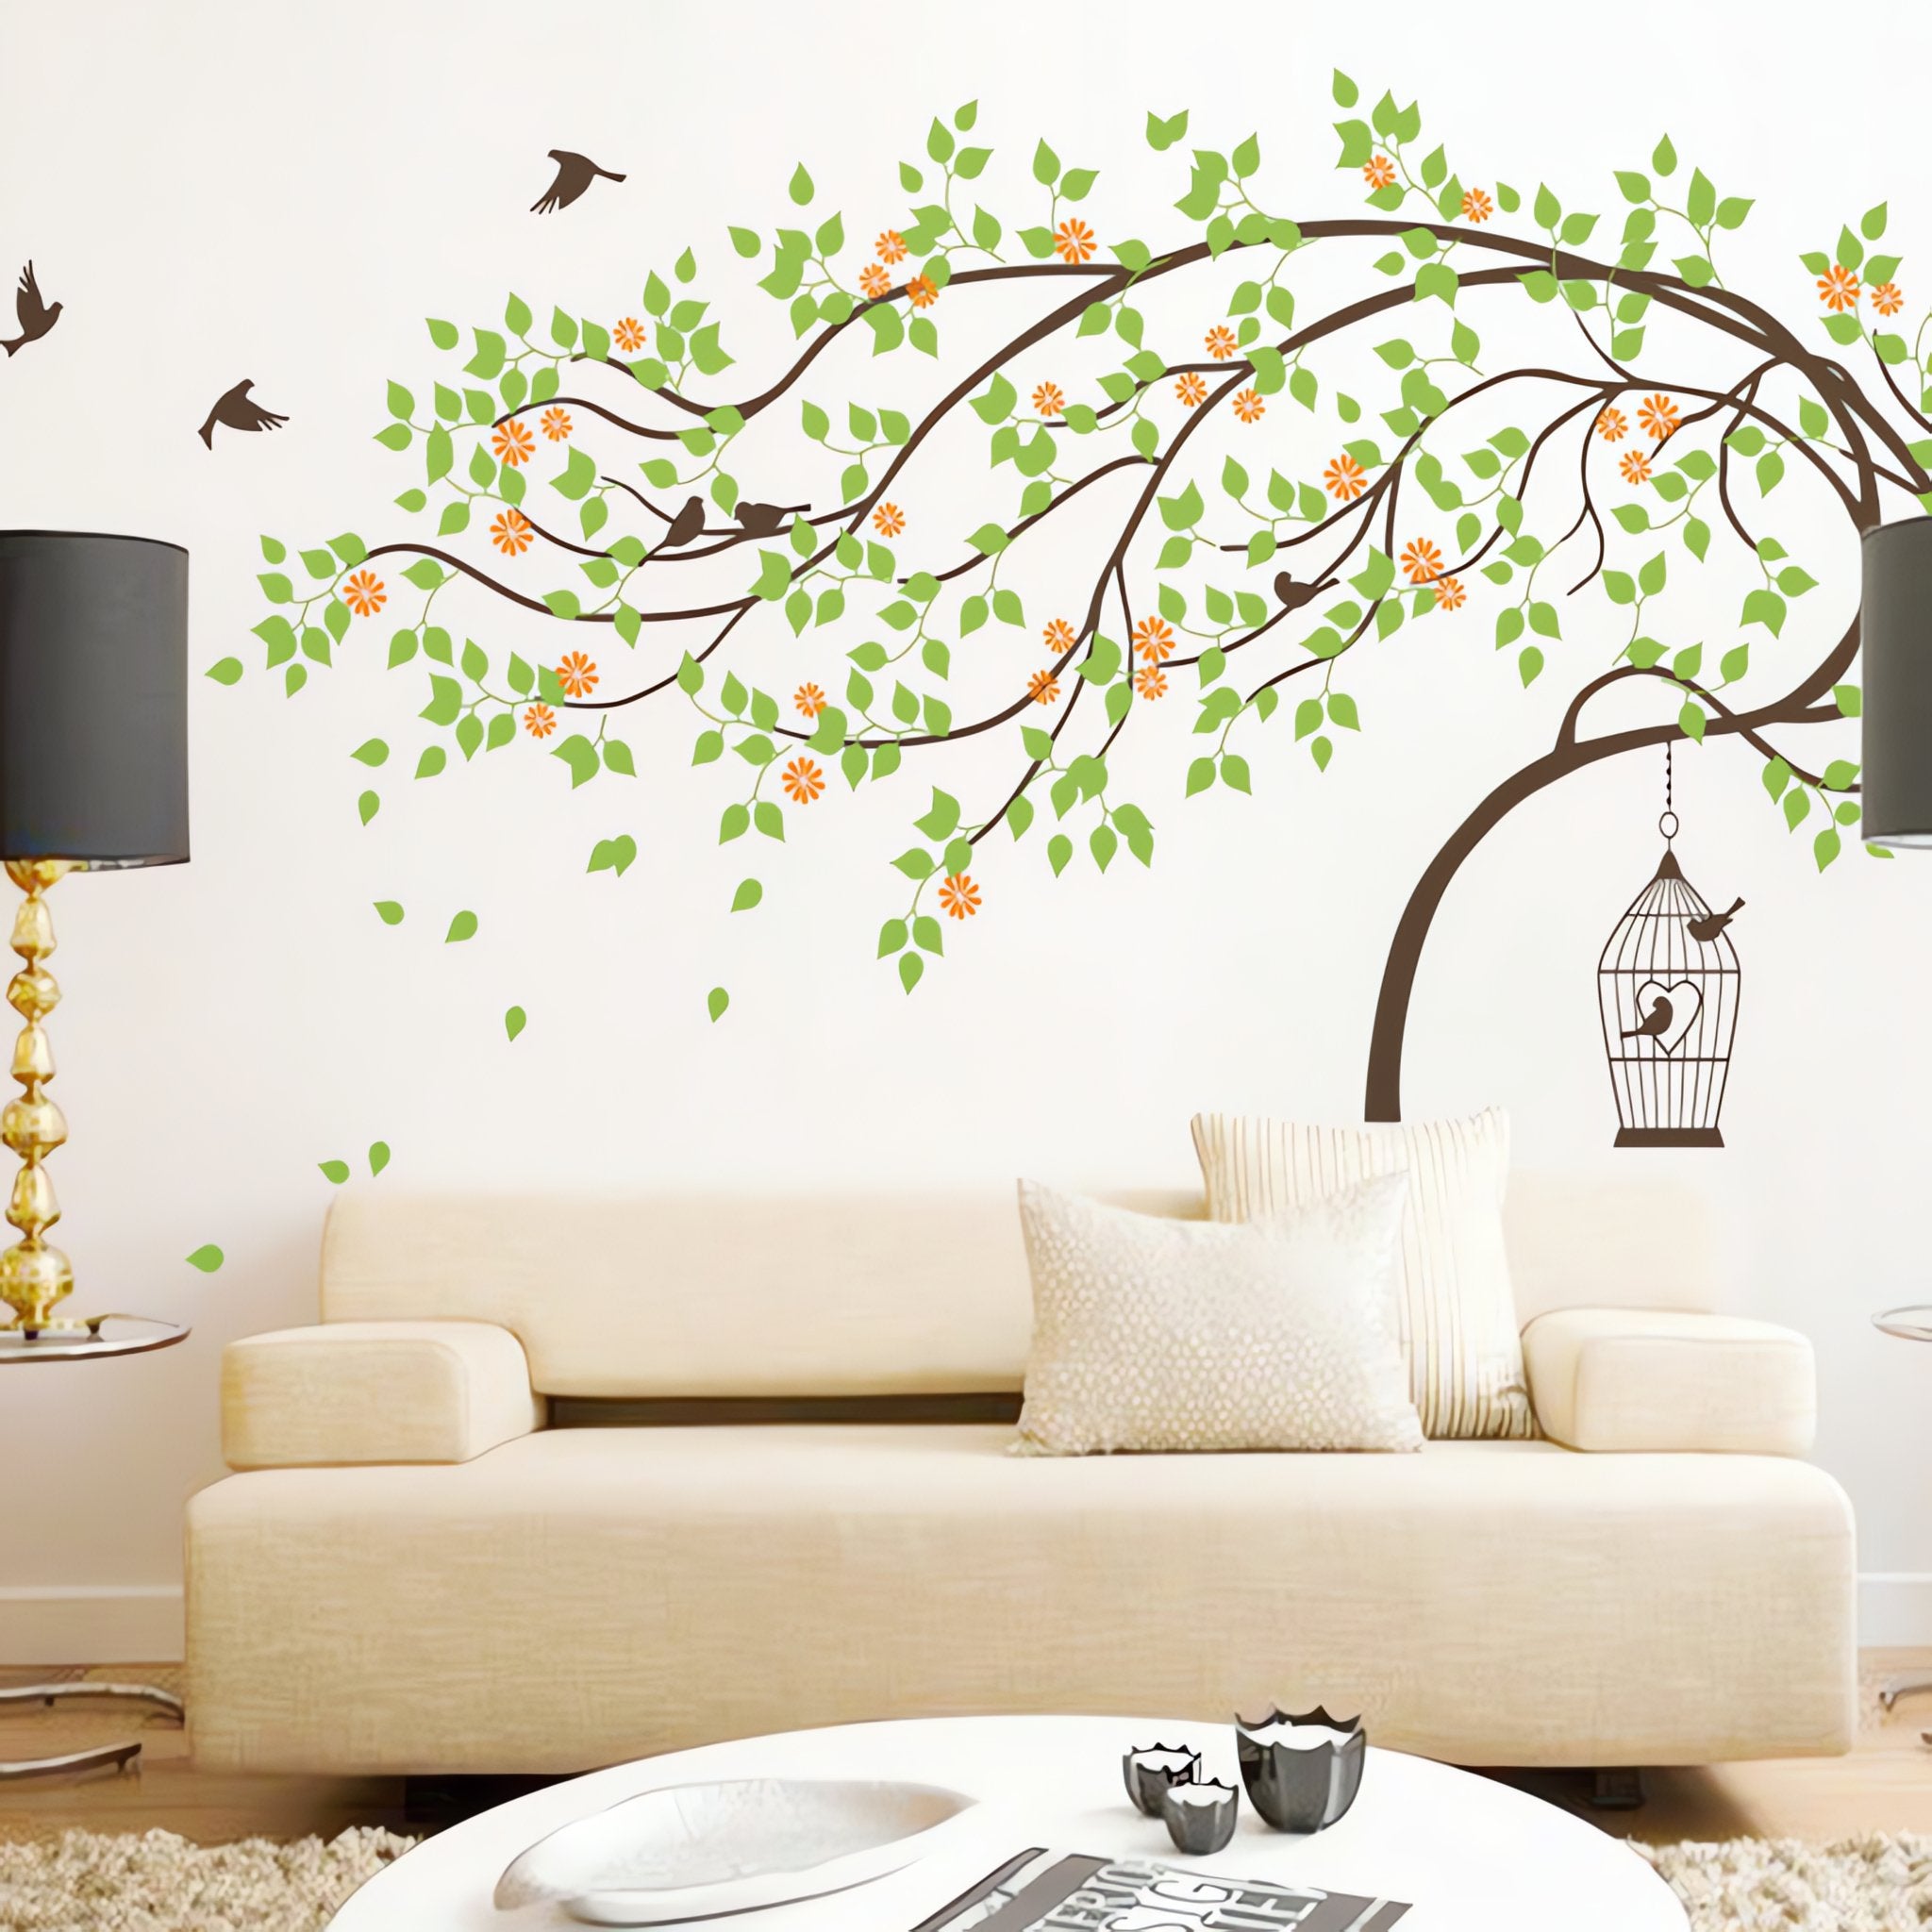 Large wall tree sticker with a leaning tree, birds and birdcage in a living room with a couch and coffee table.